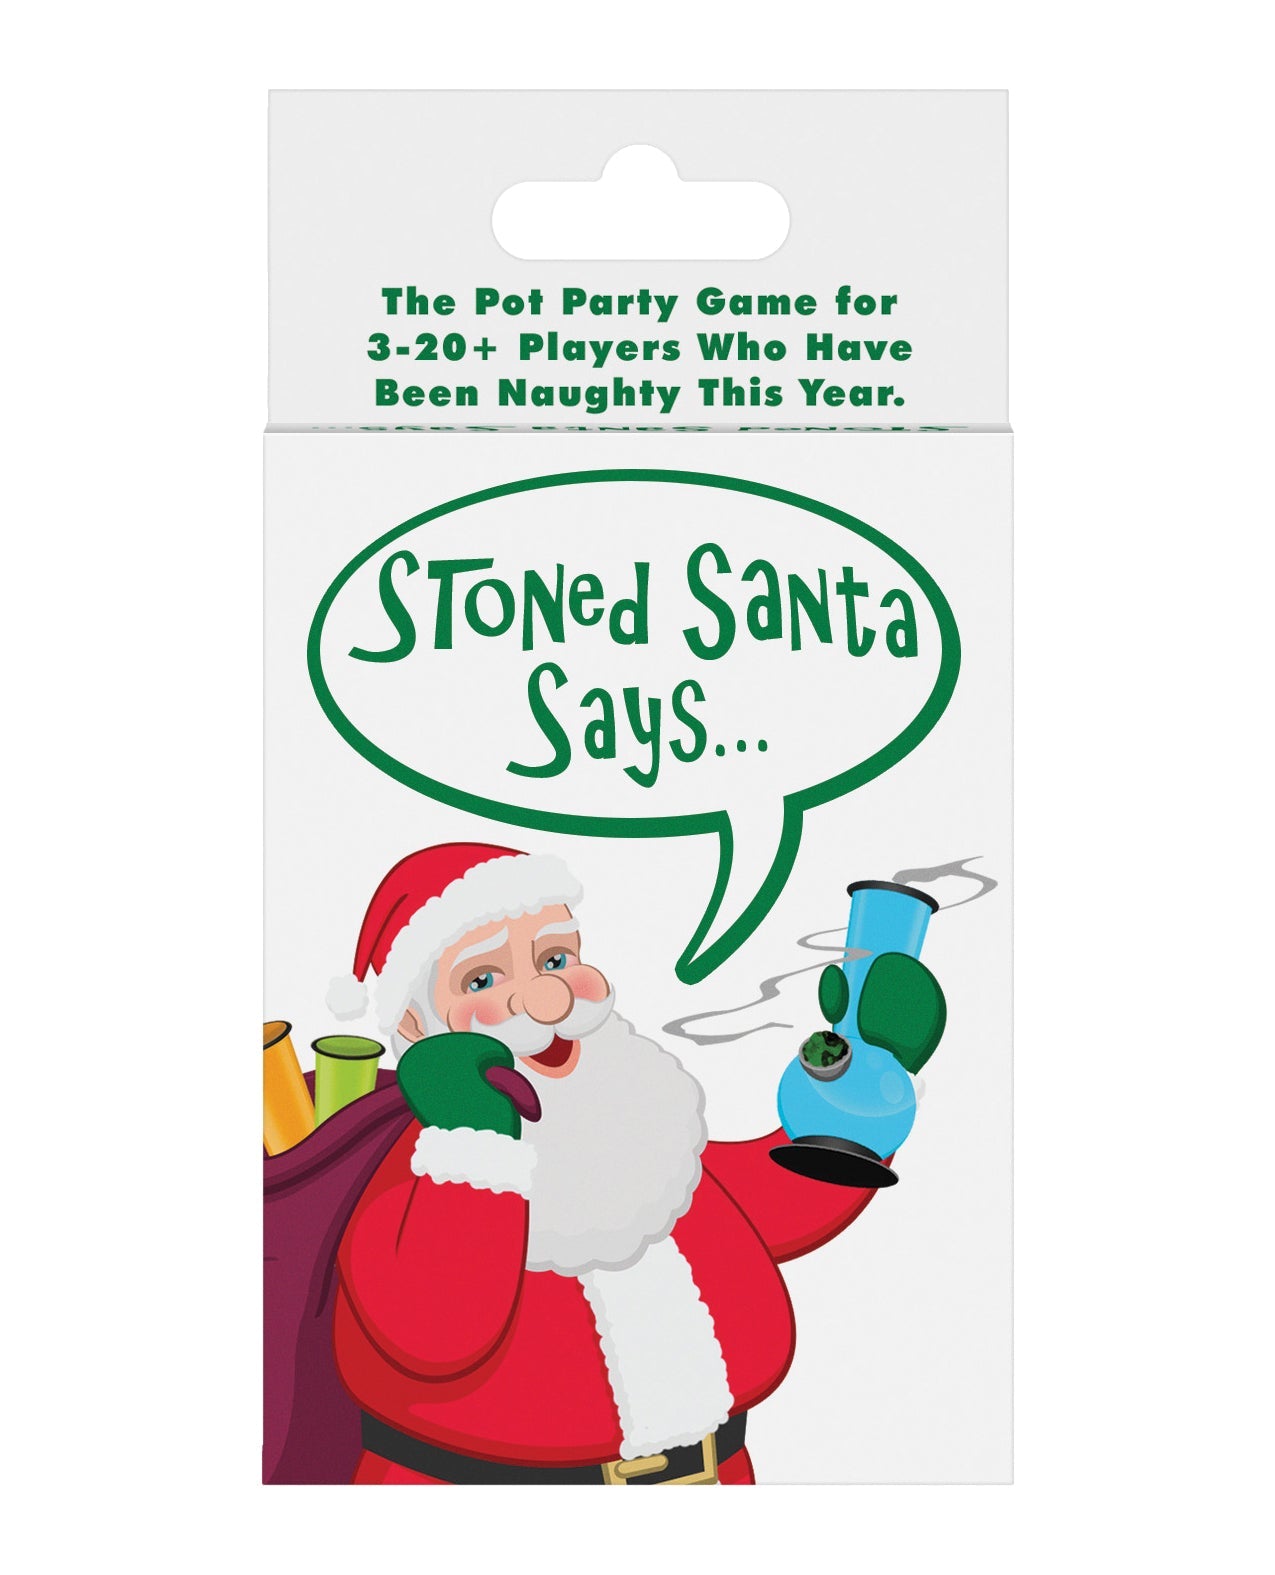 Stoned Santa Says.....The Pot Party Game